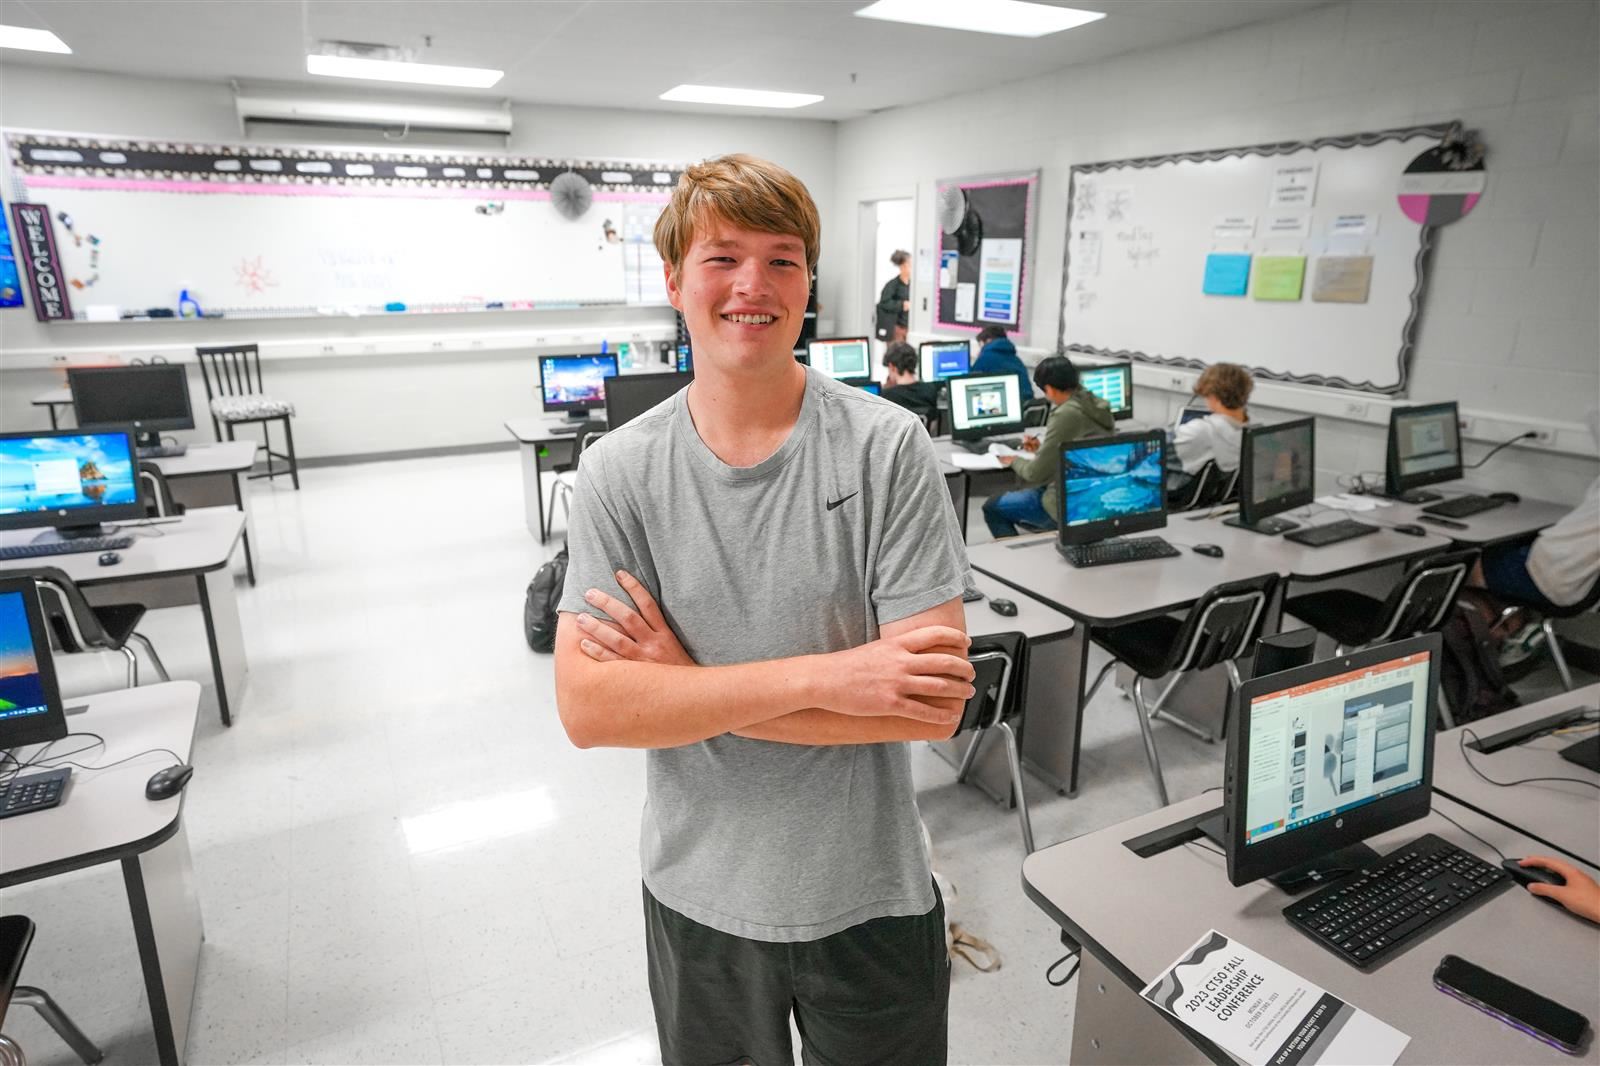 a young man stands in a computer lab crossing his arms